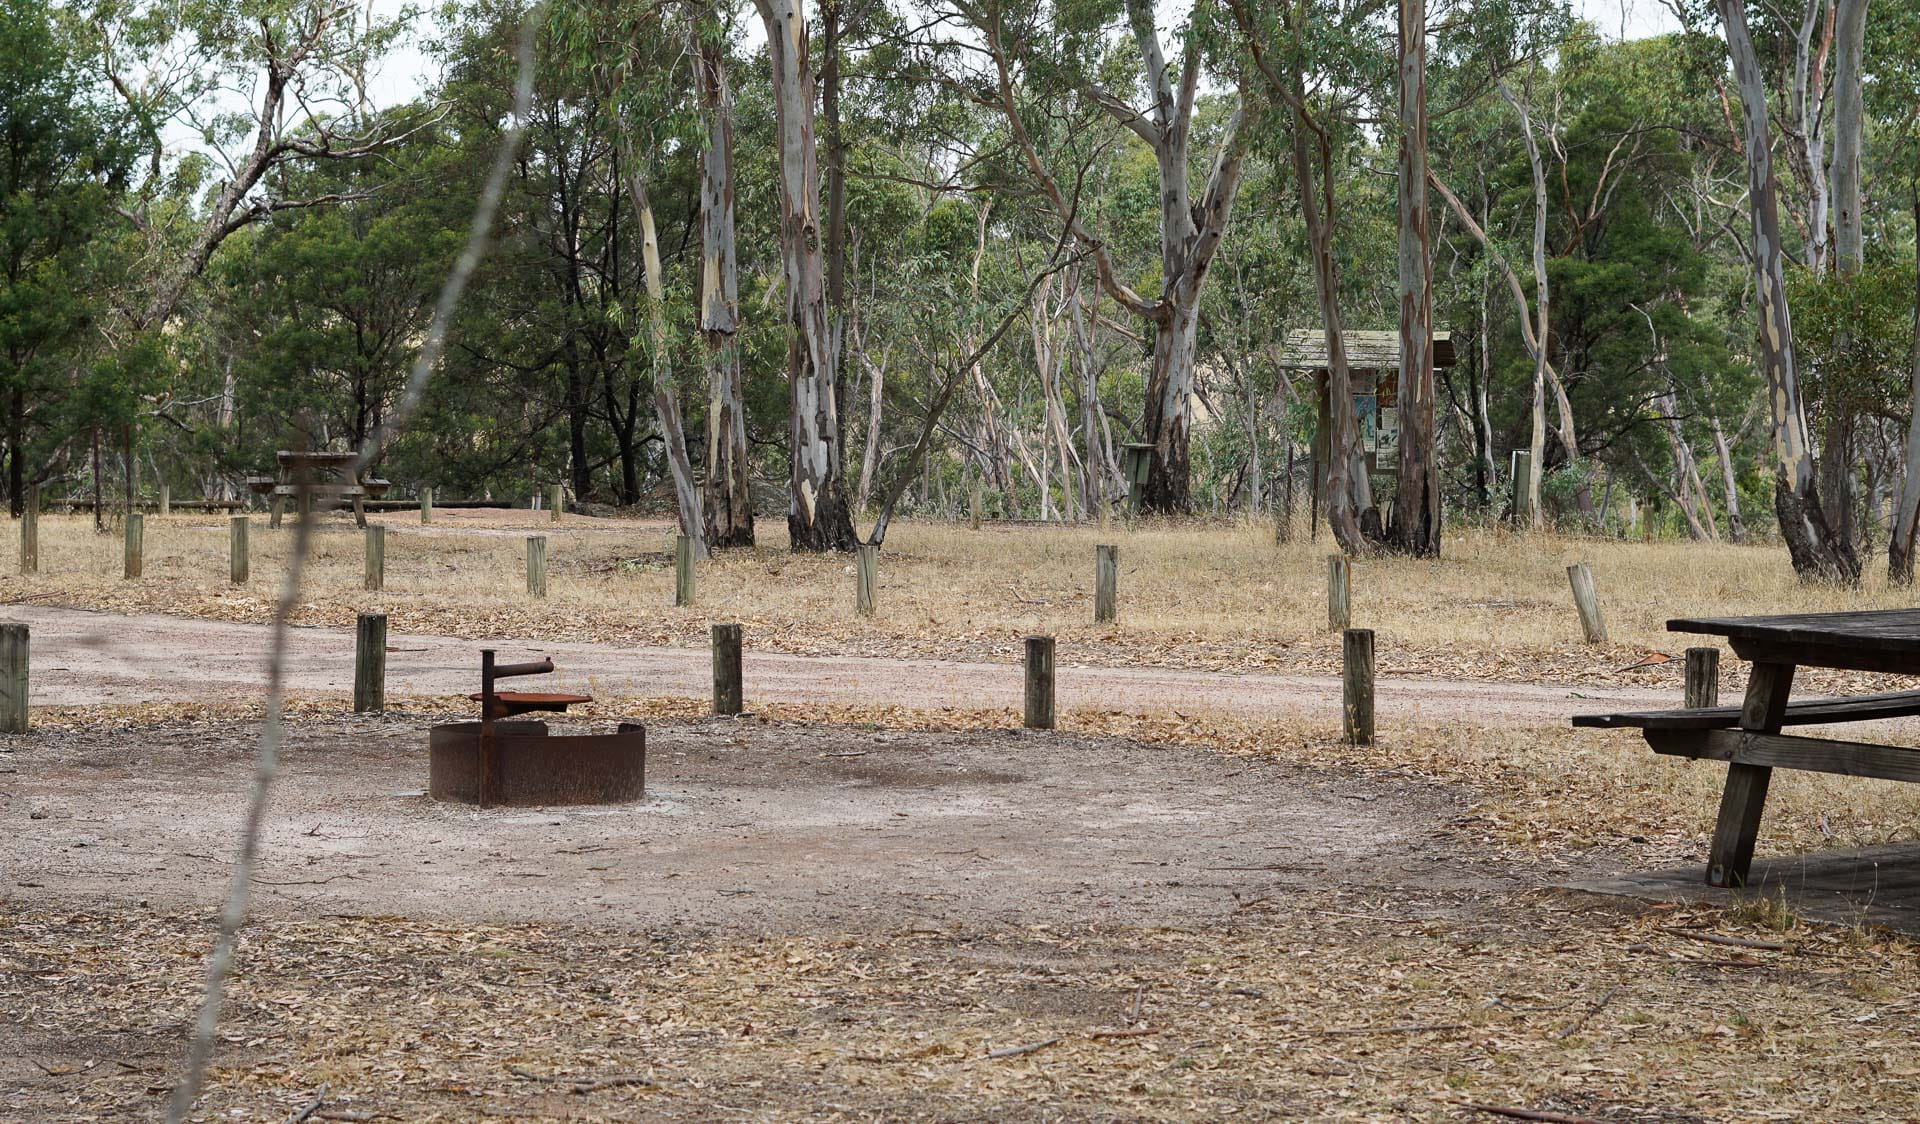 A cleared area with picnic tables and a fire pit, surrounded by forest.